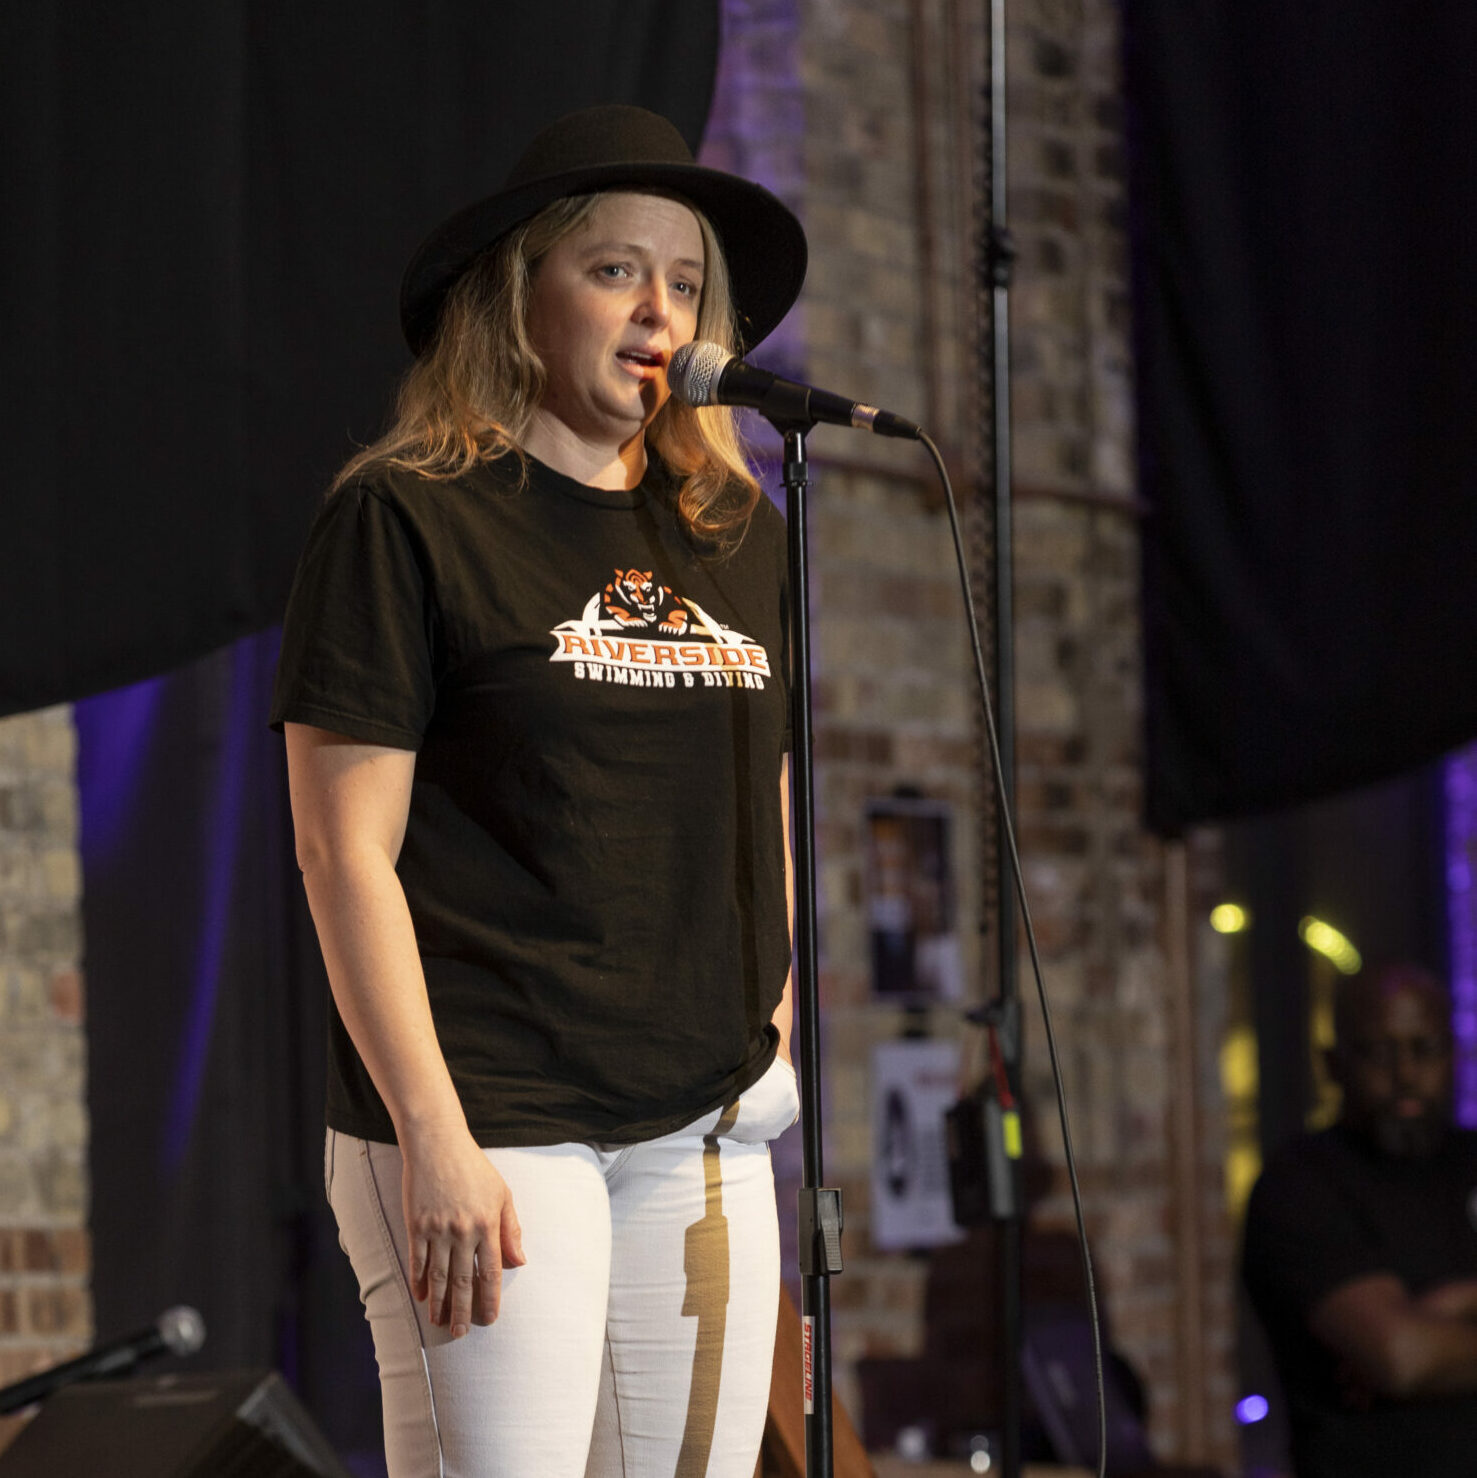 Ann Koller, a blonde white woman, speaks into a microphone on stage. She is wearing a black brimmed hat, black tshirt, and white pants.